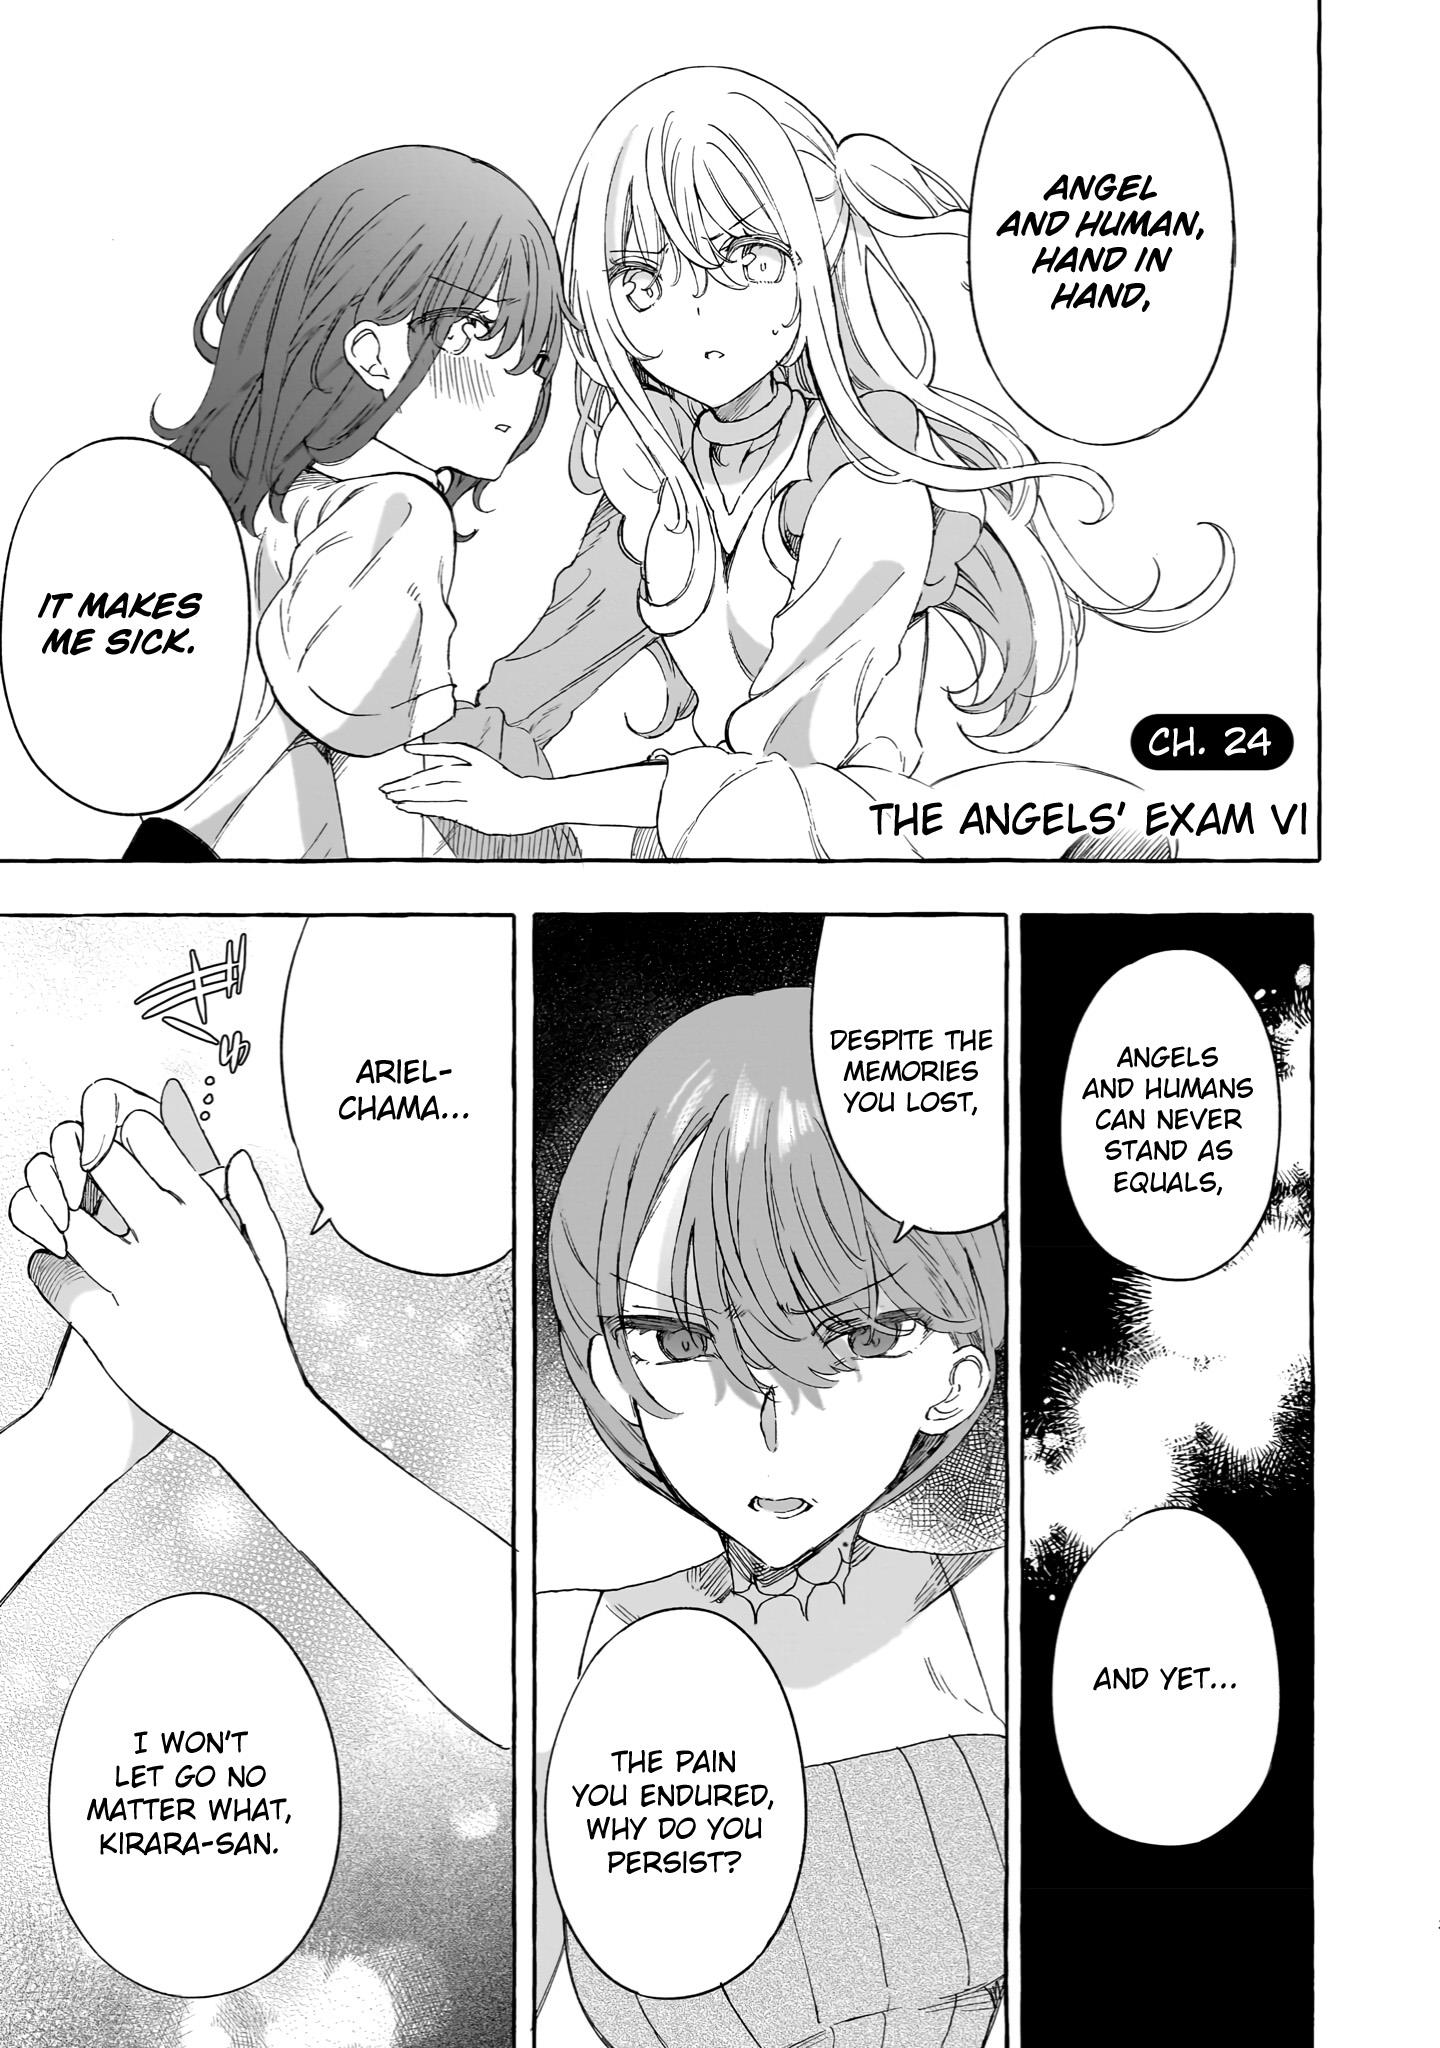 I'm An Elite Angel, But I'm Troubled By An Impregnable High School Girl Vol.3 Chapter 24: The Angels' Exam Part 6 - Picture 1